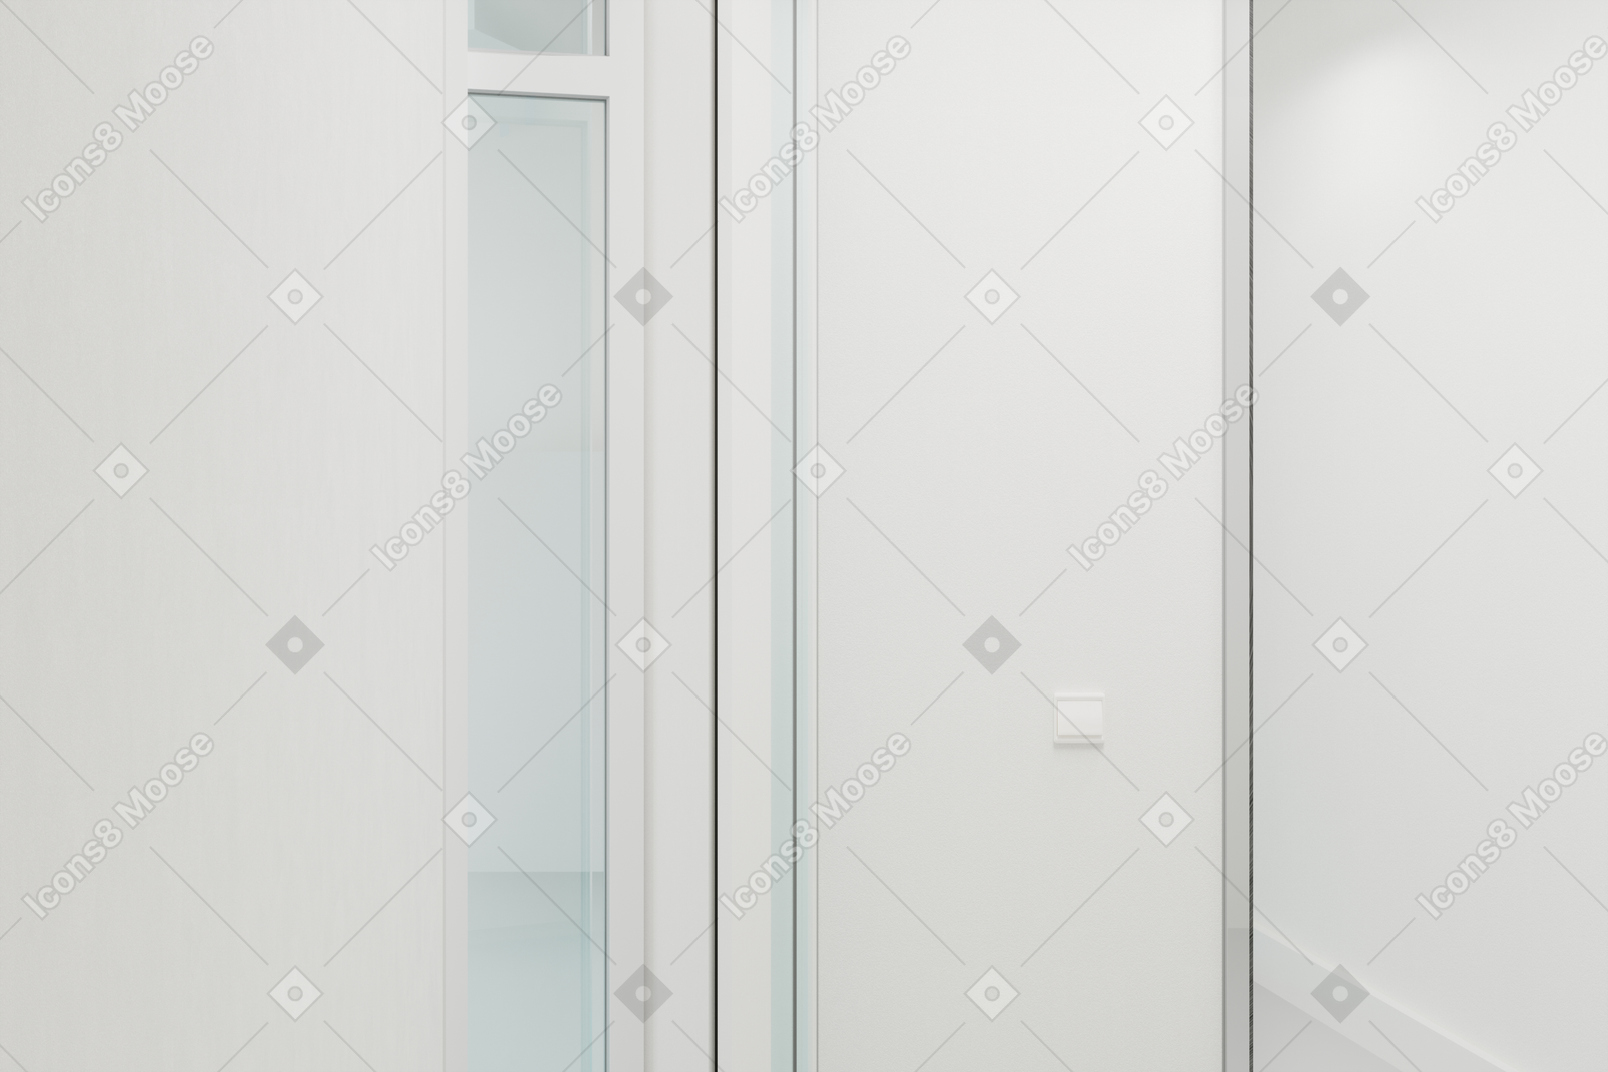 White hallway with a glass door